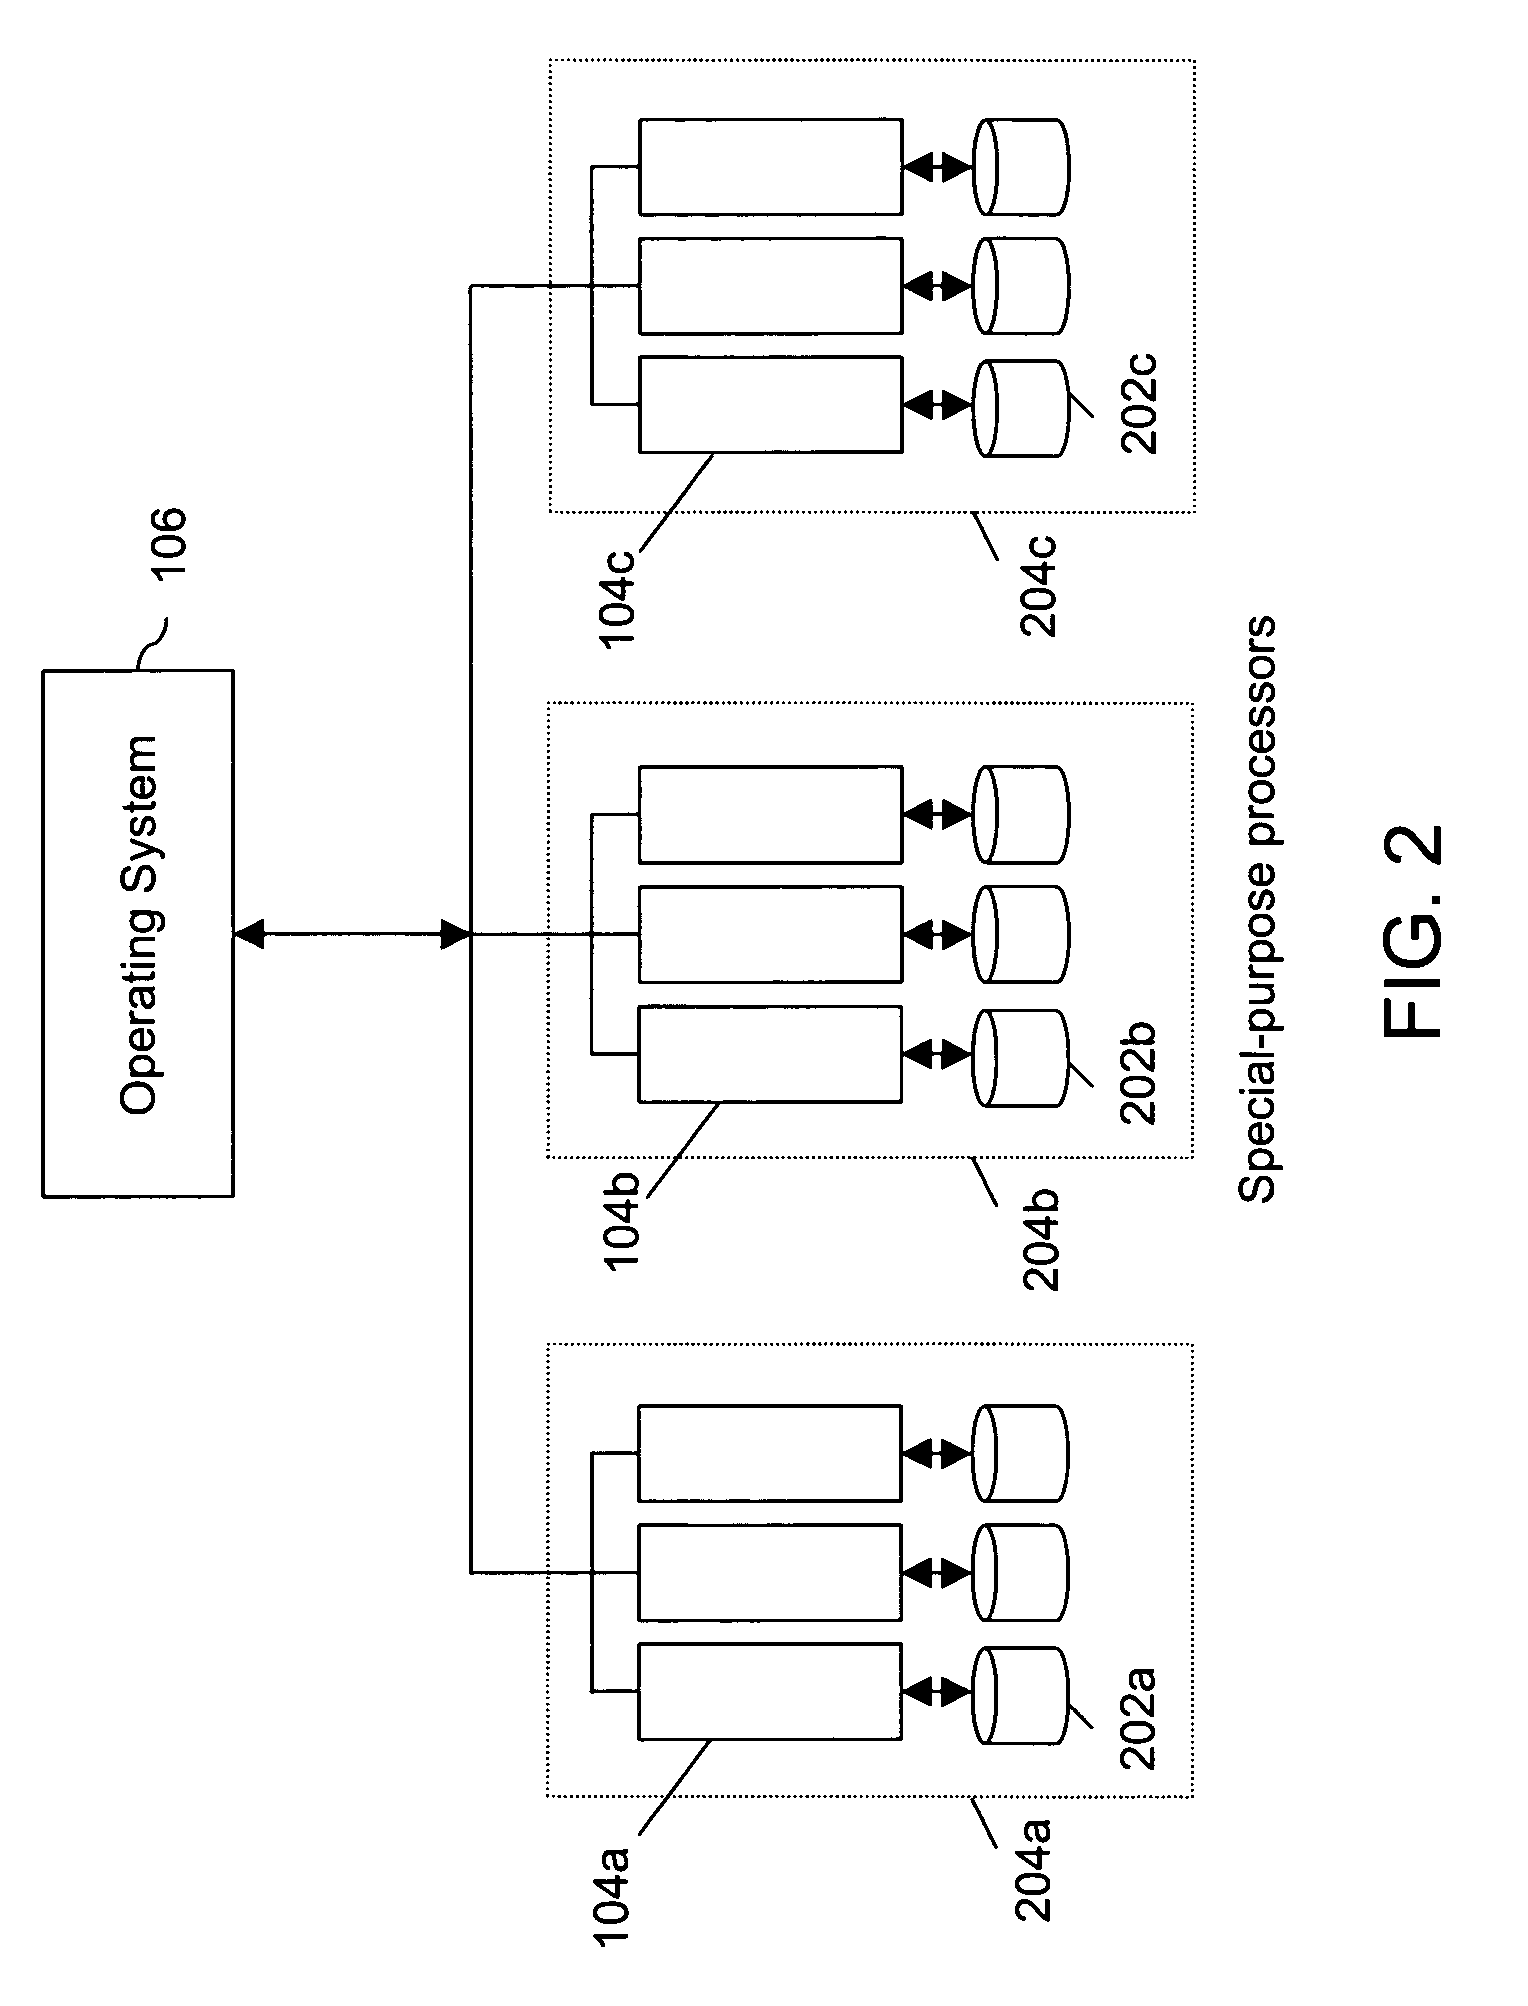 Method and system for allocation of special purpose computing resources in a multiprocessor system